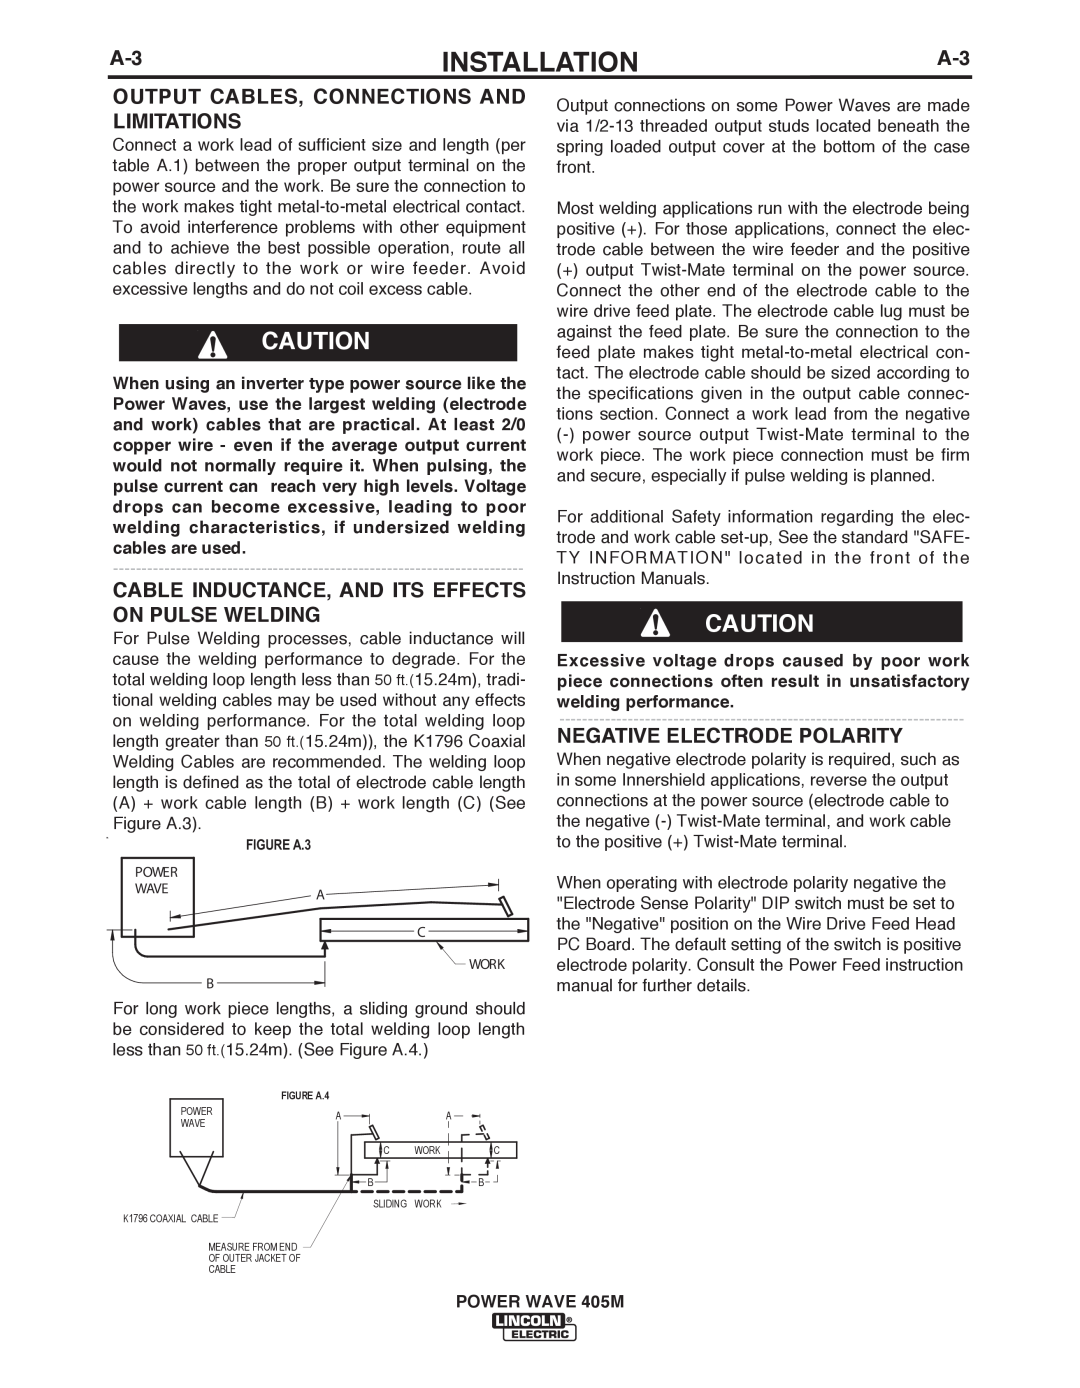 Lincoln Electric IM846-A OUTPUT CAbLES, CONNECTIONS AND LIMITATIONS, CAbLE INDUCTANCE, AND ITS EFFECTS ON PULSE WELDING 